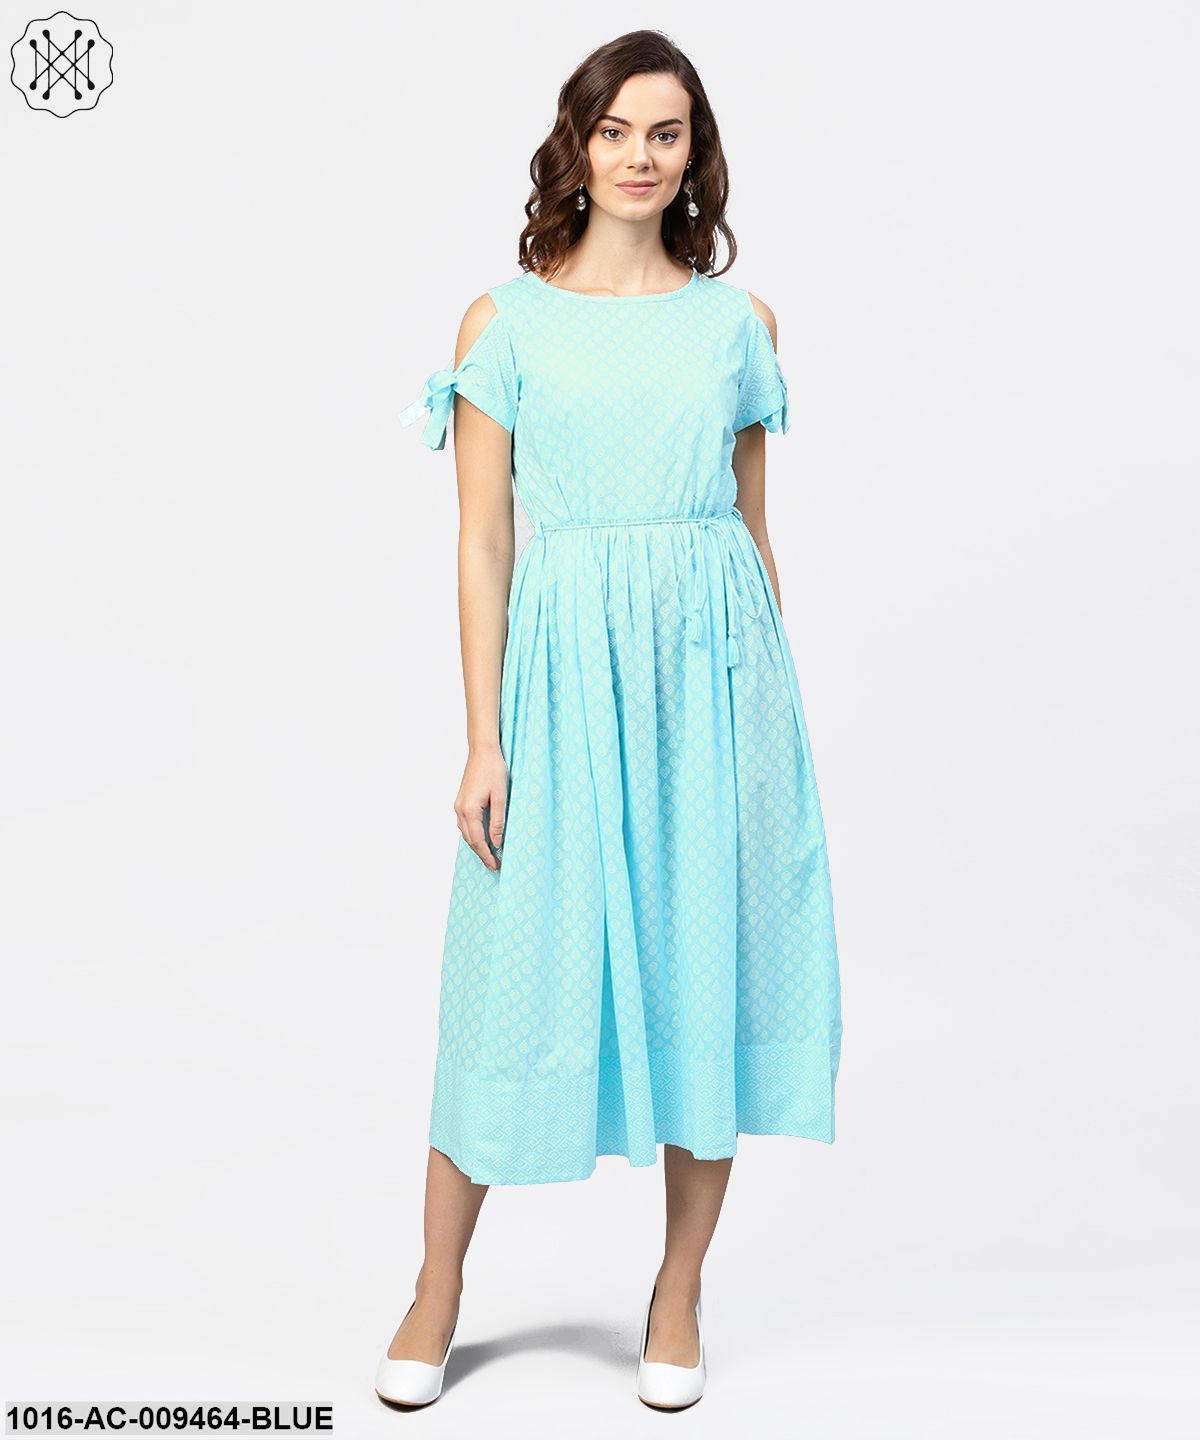 Printed Round Neck With A Draw-String At Yoke And Knotted Short Sleeves Maxi Dress